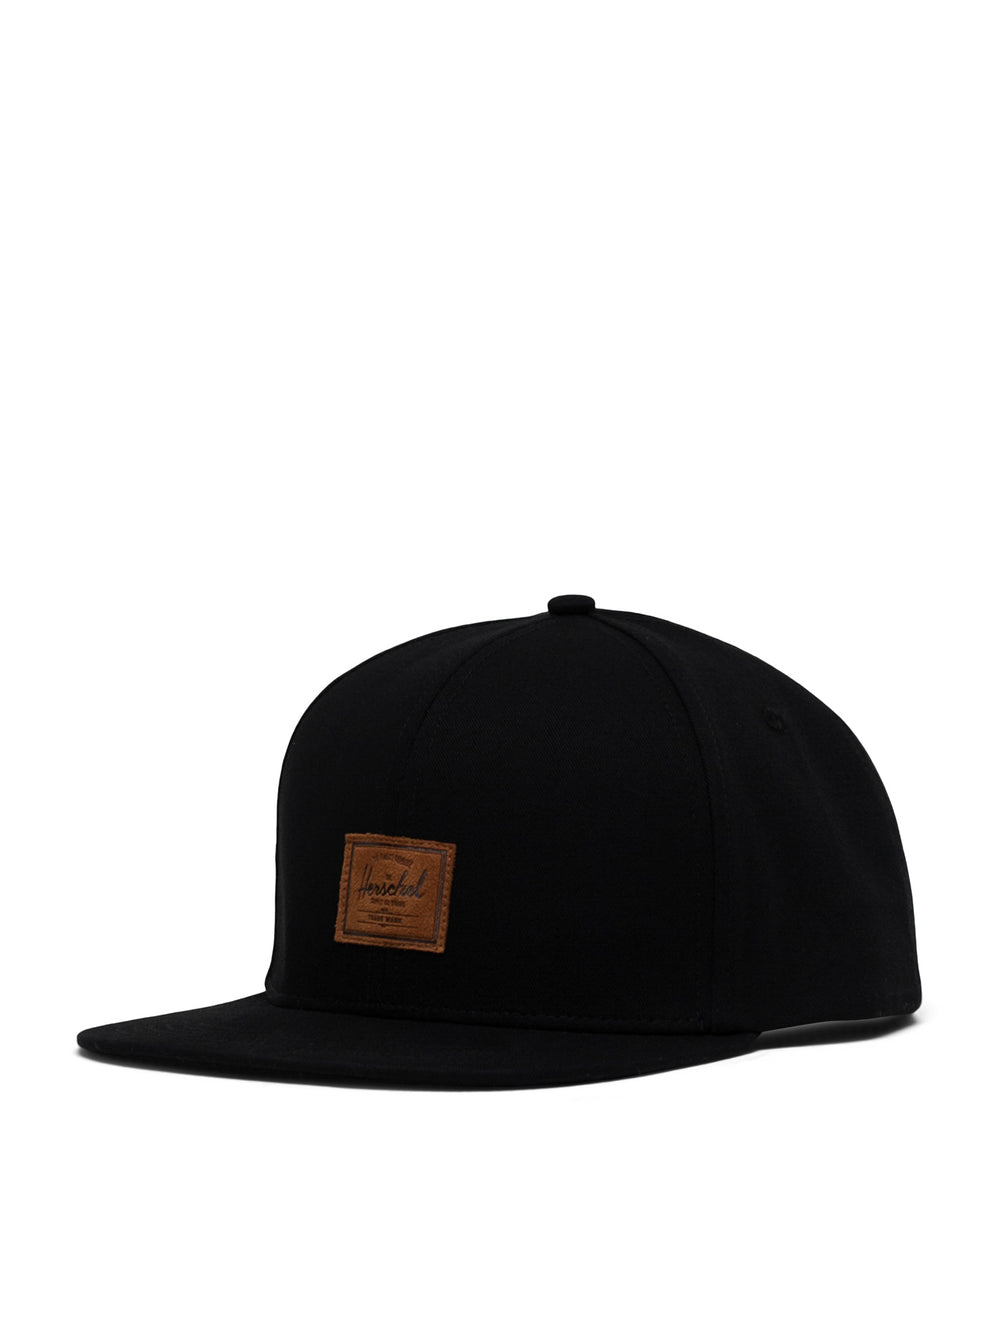 HERSCHEL SUPPLY CO. WHALER CLASSIC 6 PANEL SUEDE  - CLEARANCE